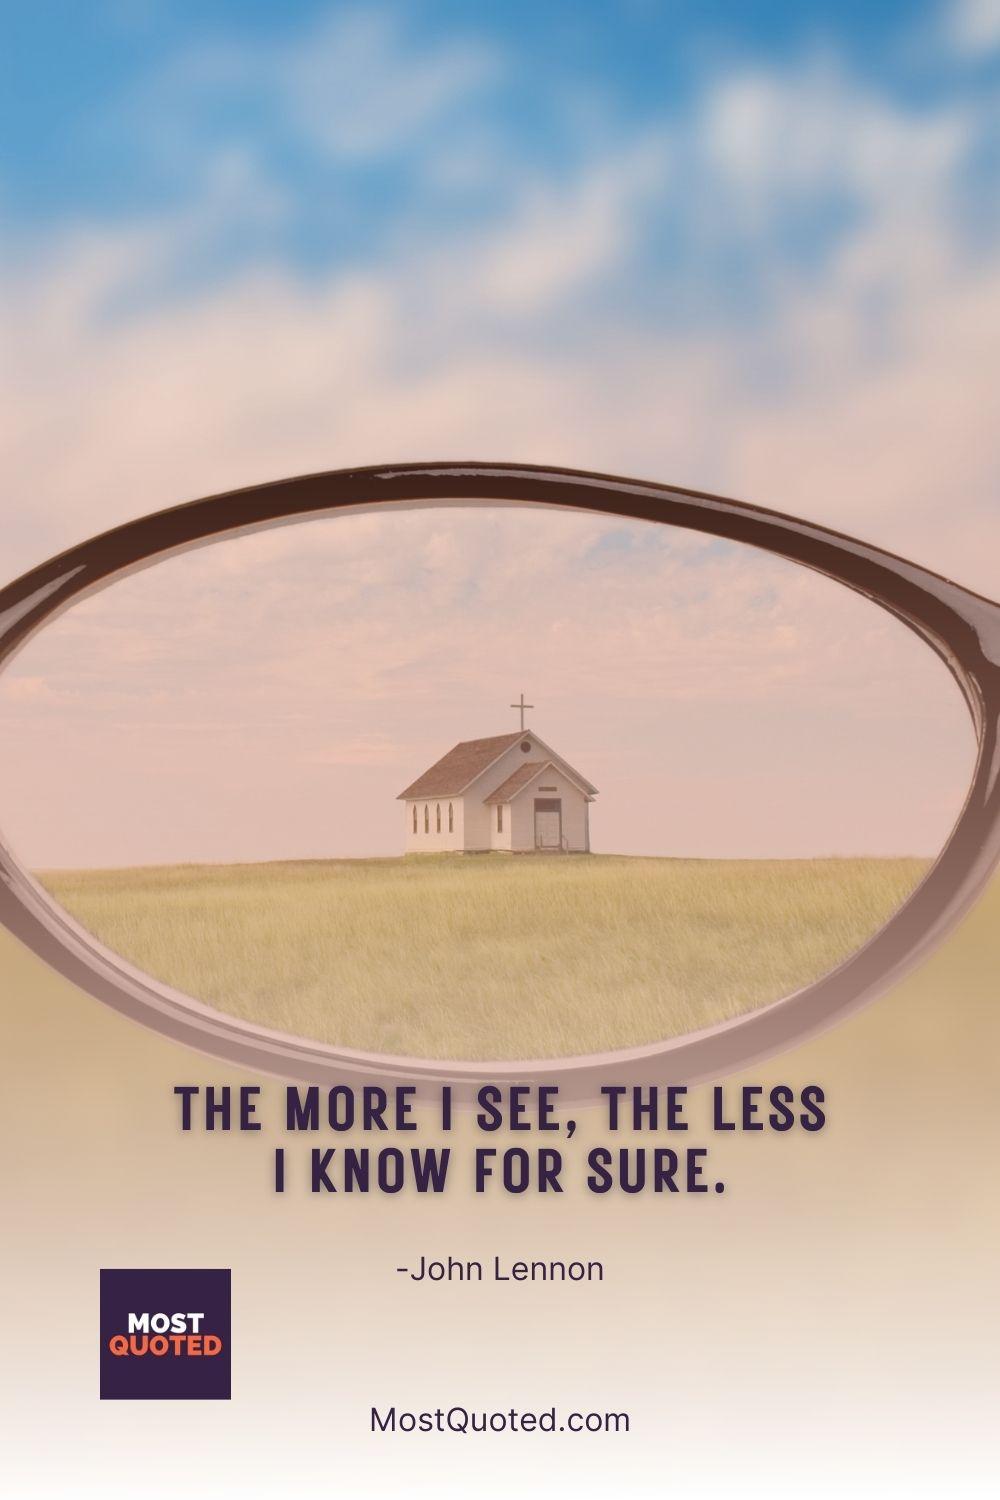 The more I see, the less I know for sure. - John Lennon